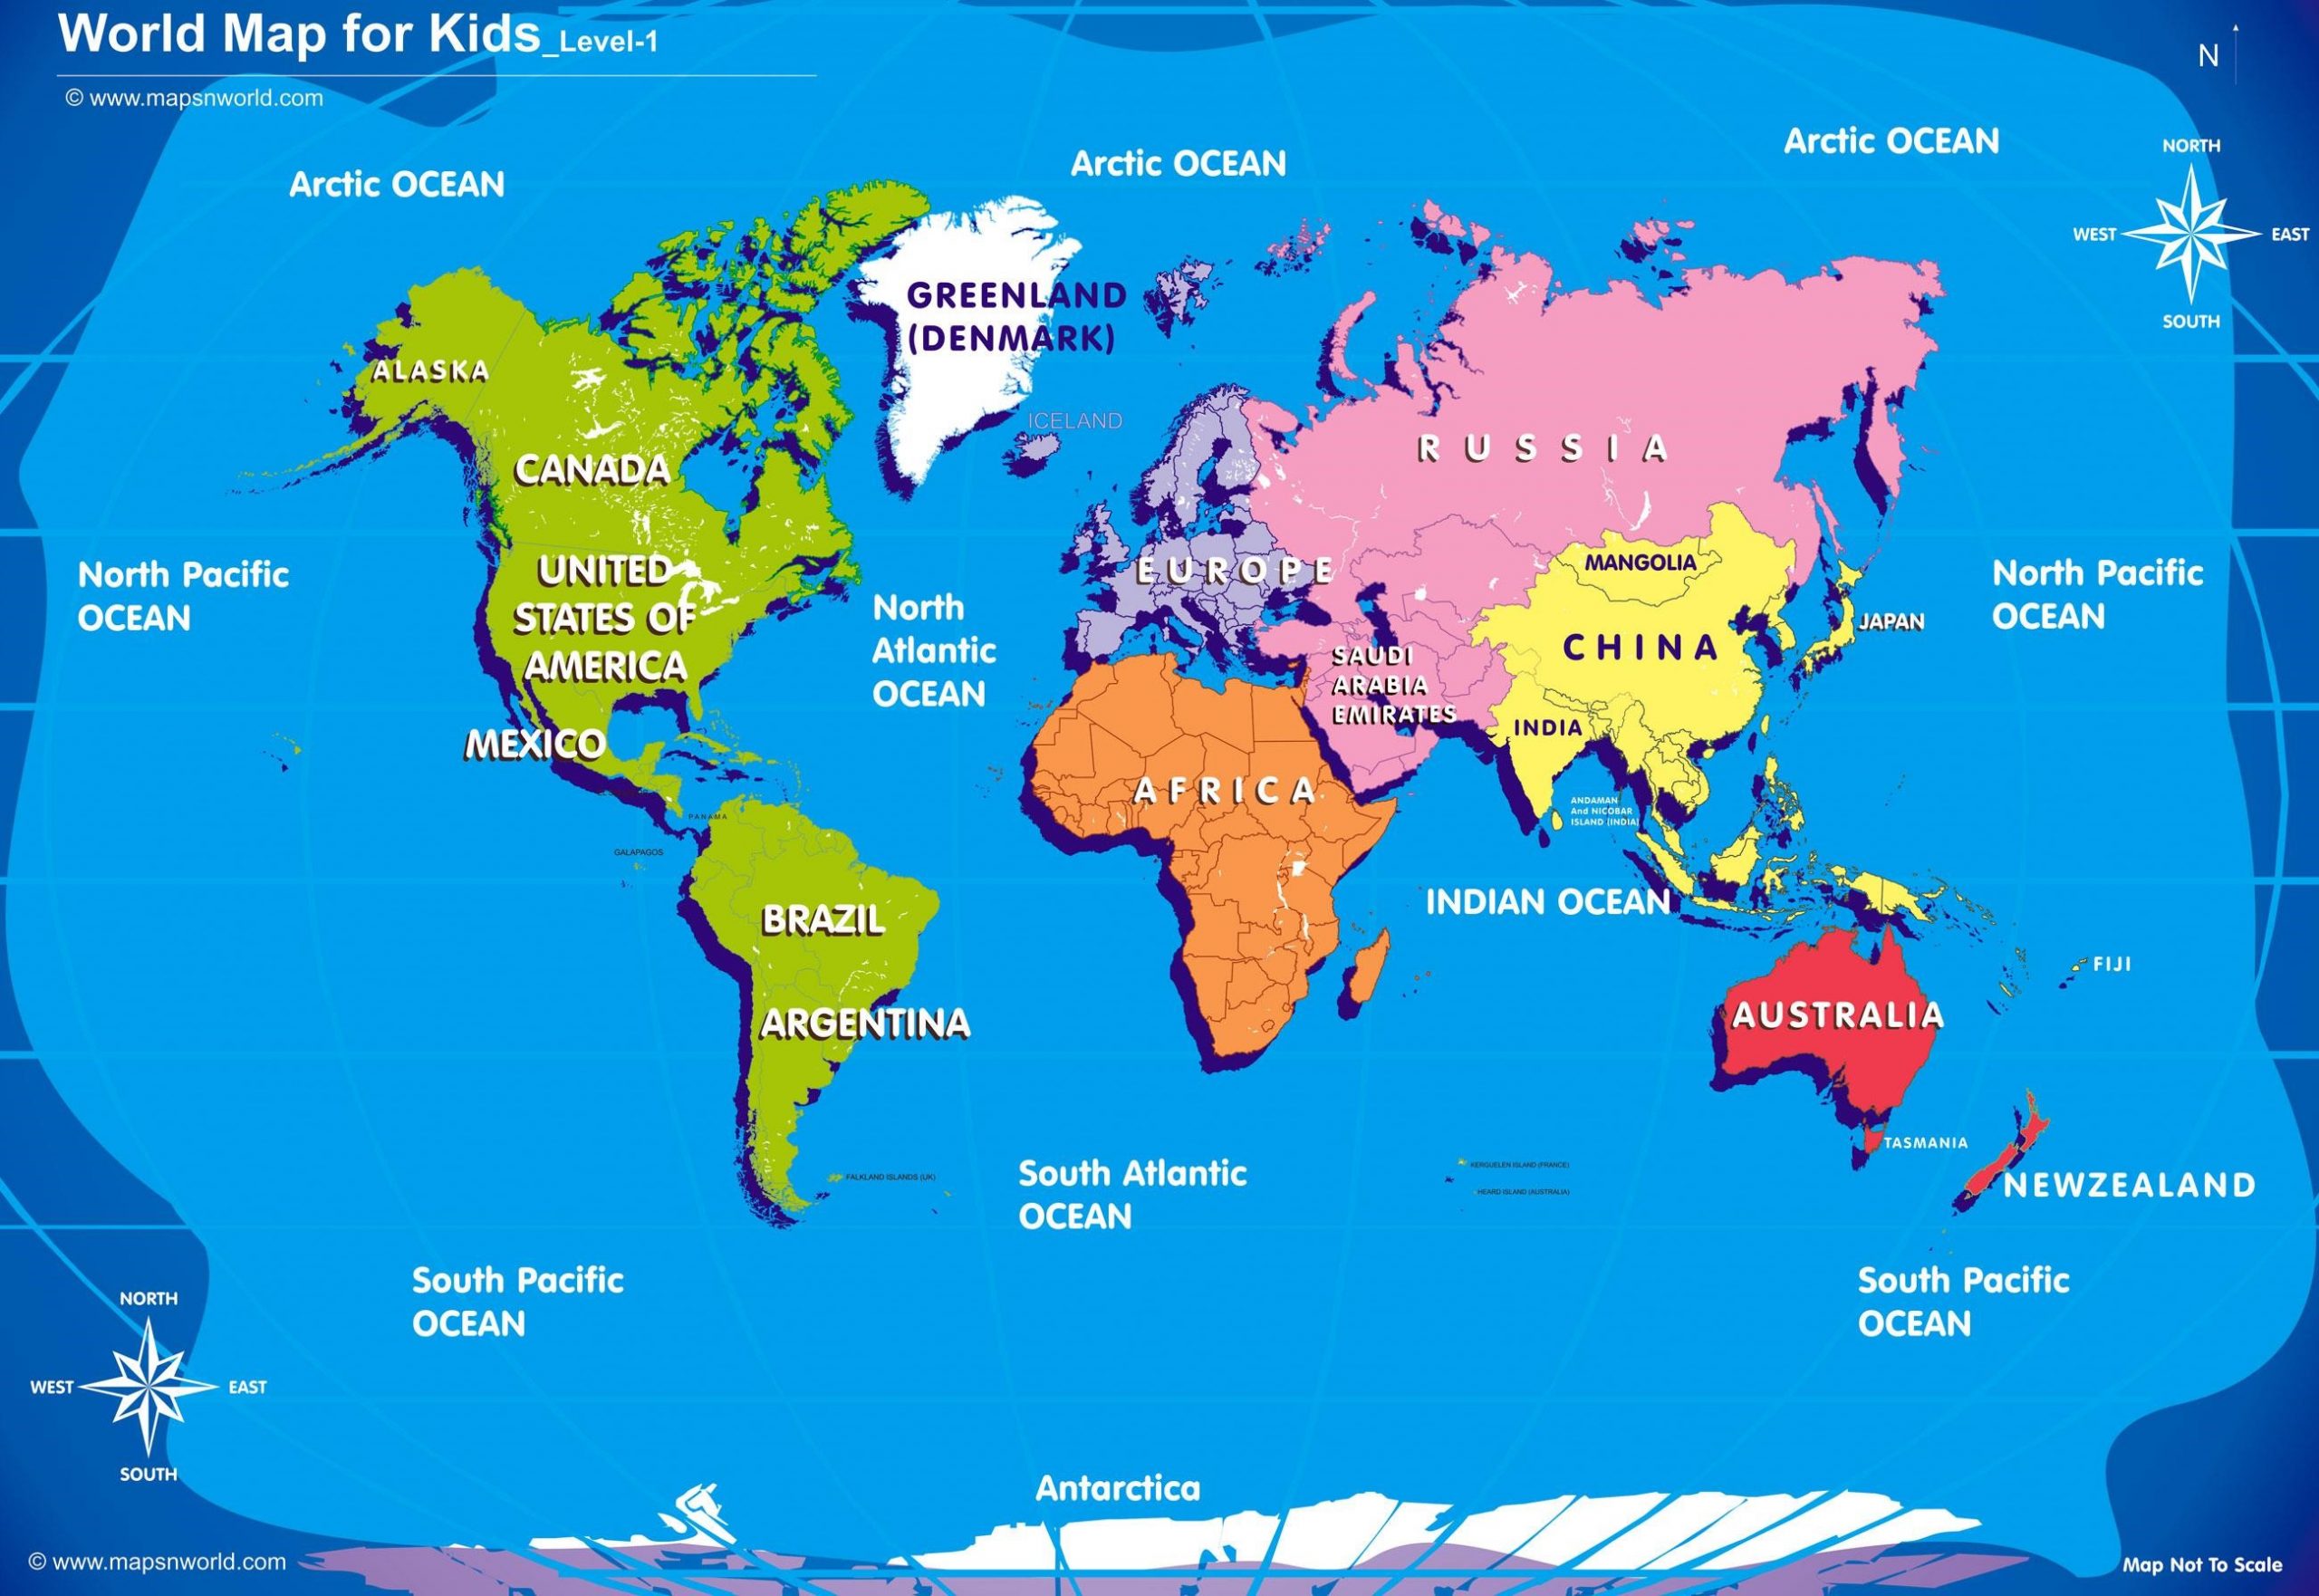 World Map For Kids Big Size W R Ibackgroundzcom Jpg Map Pictures